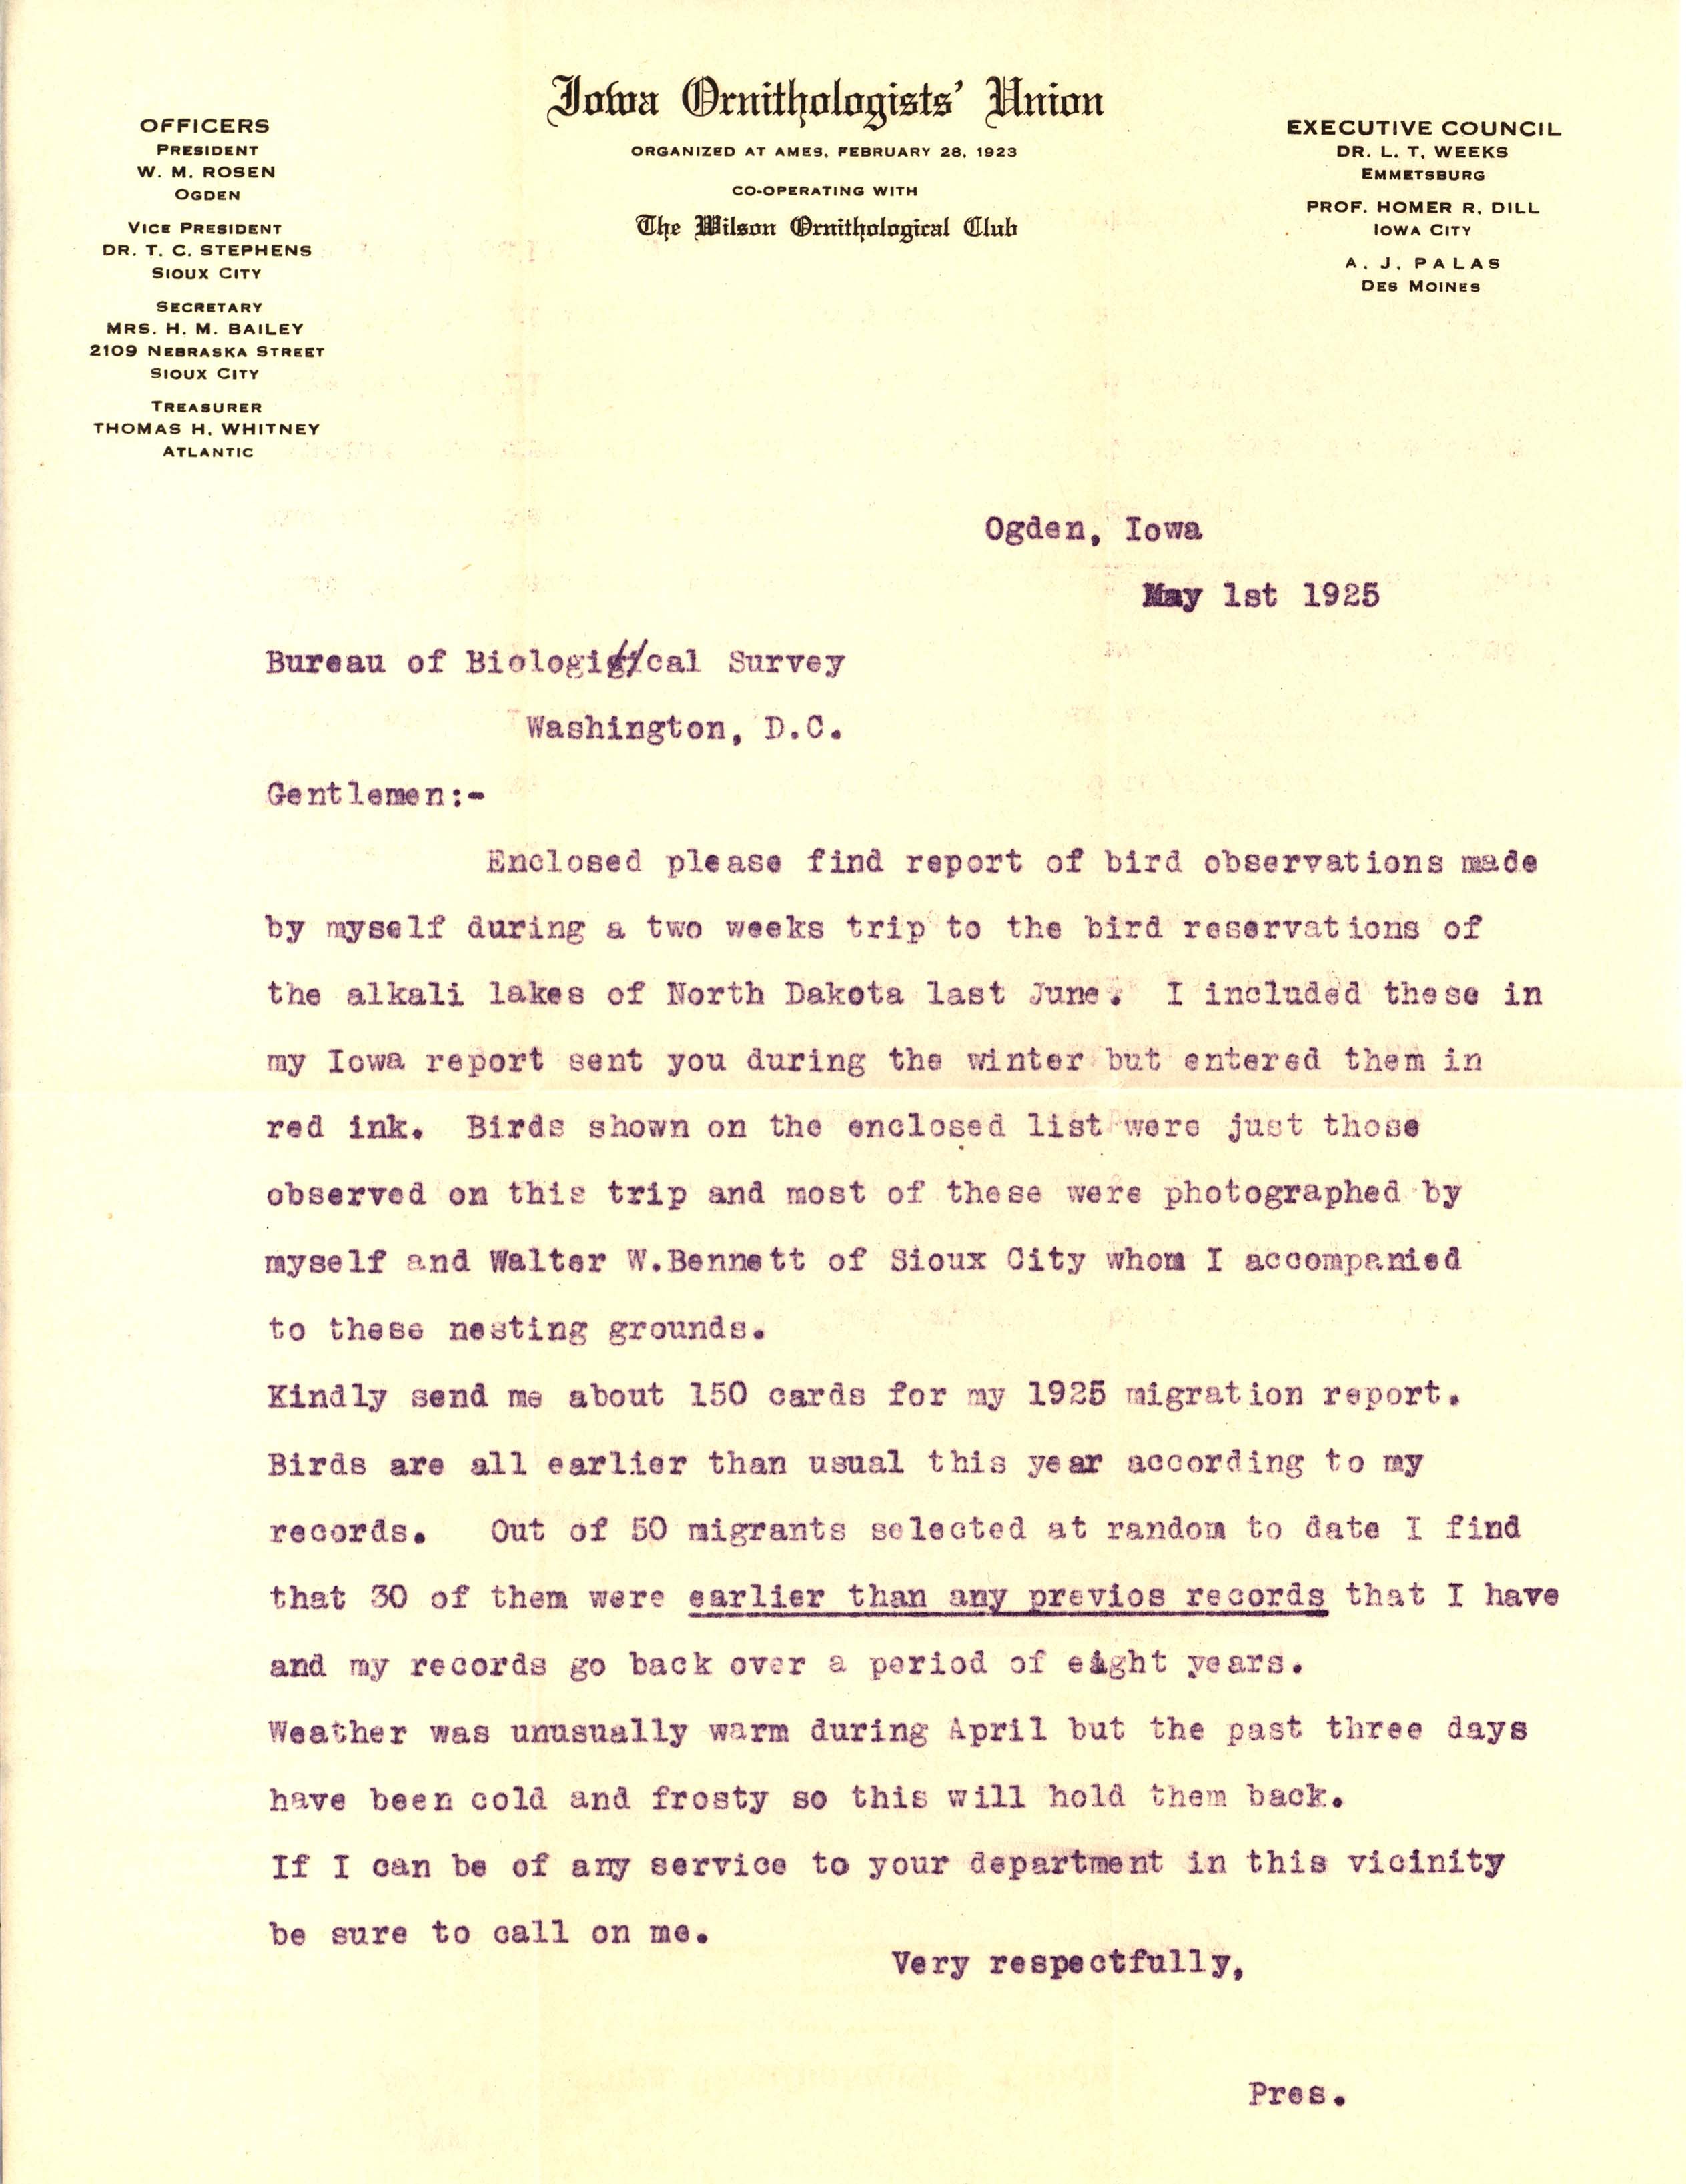 Walter Rosene letter to the United States Bureau of Biological Survey regarding bird observations from a trip to North Dakota, May 1, 1925